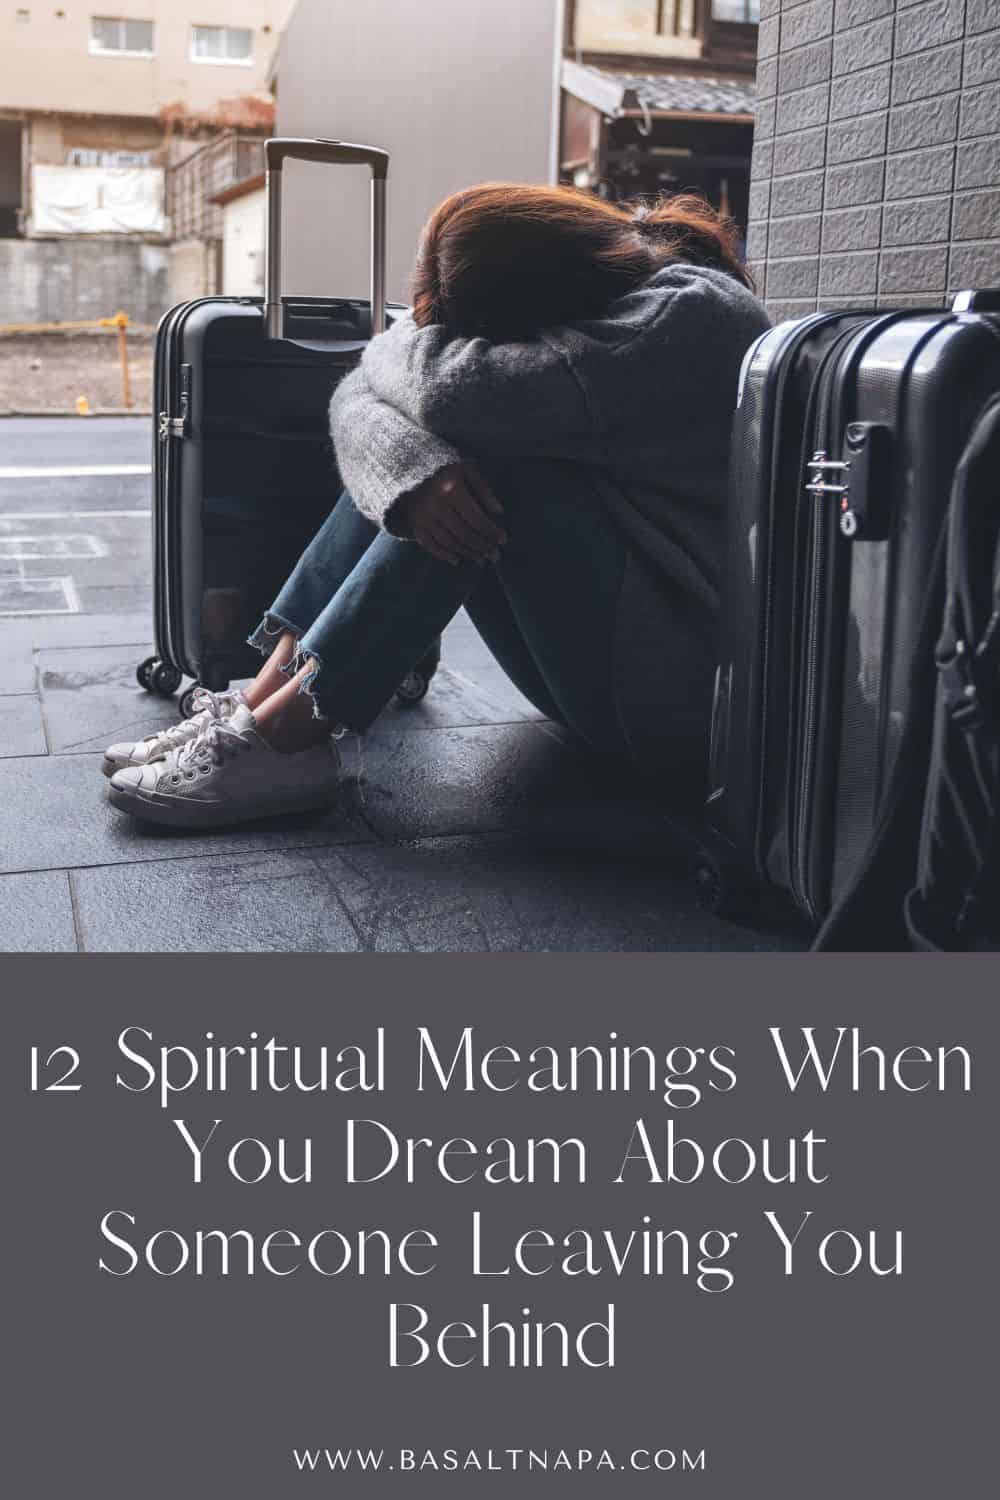 12 Spiritual Meanings When You Dream About Someone Leaving You Behind